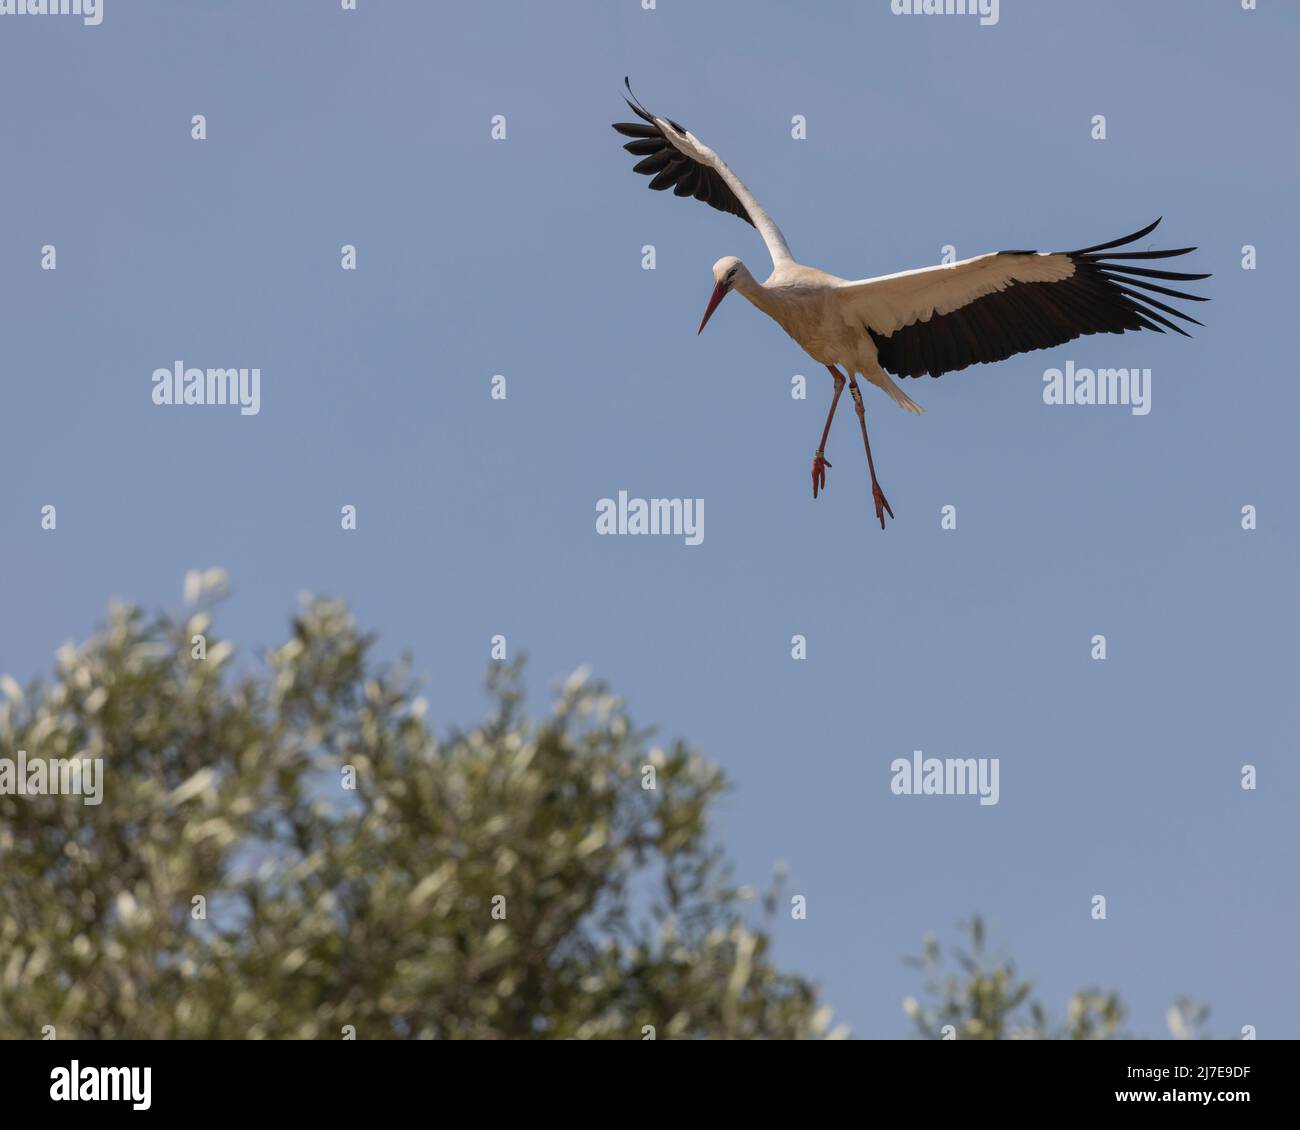 A White Stork, Ciconia ciconia, with a ring on each leg for identification and study, coming down to land on a bush. Doñana National Park, Spain, Stock Photo